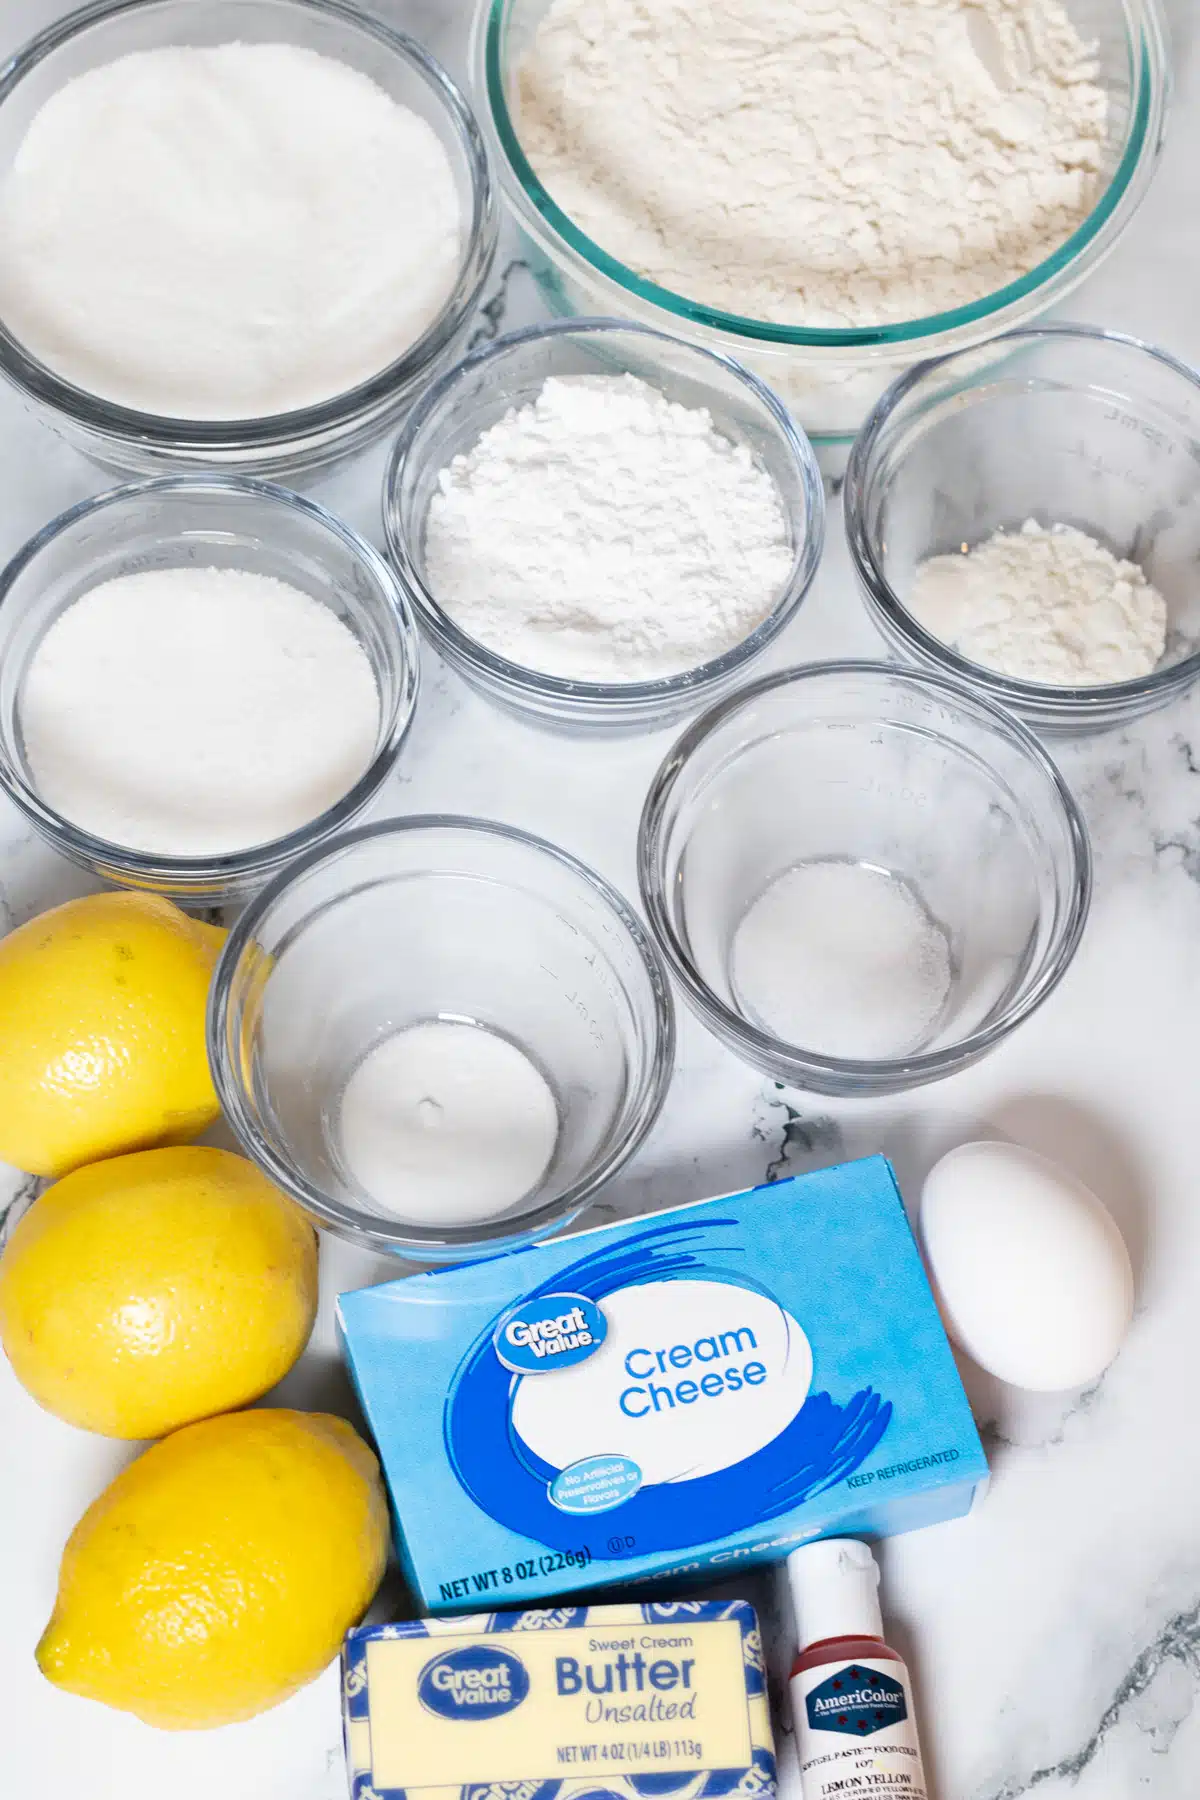 Lemon cream cheese crinkle cookie ingredients measured out and ready to mix, chill, and bake.